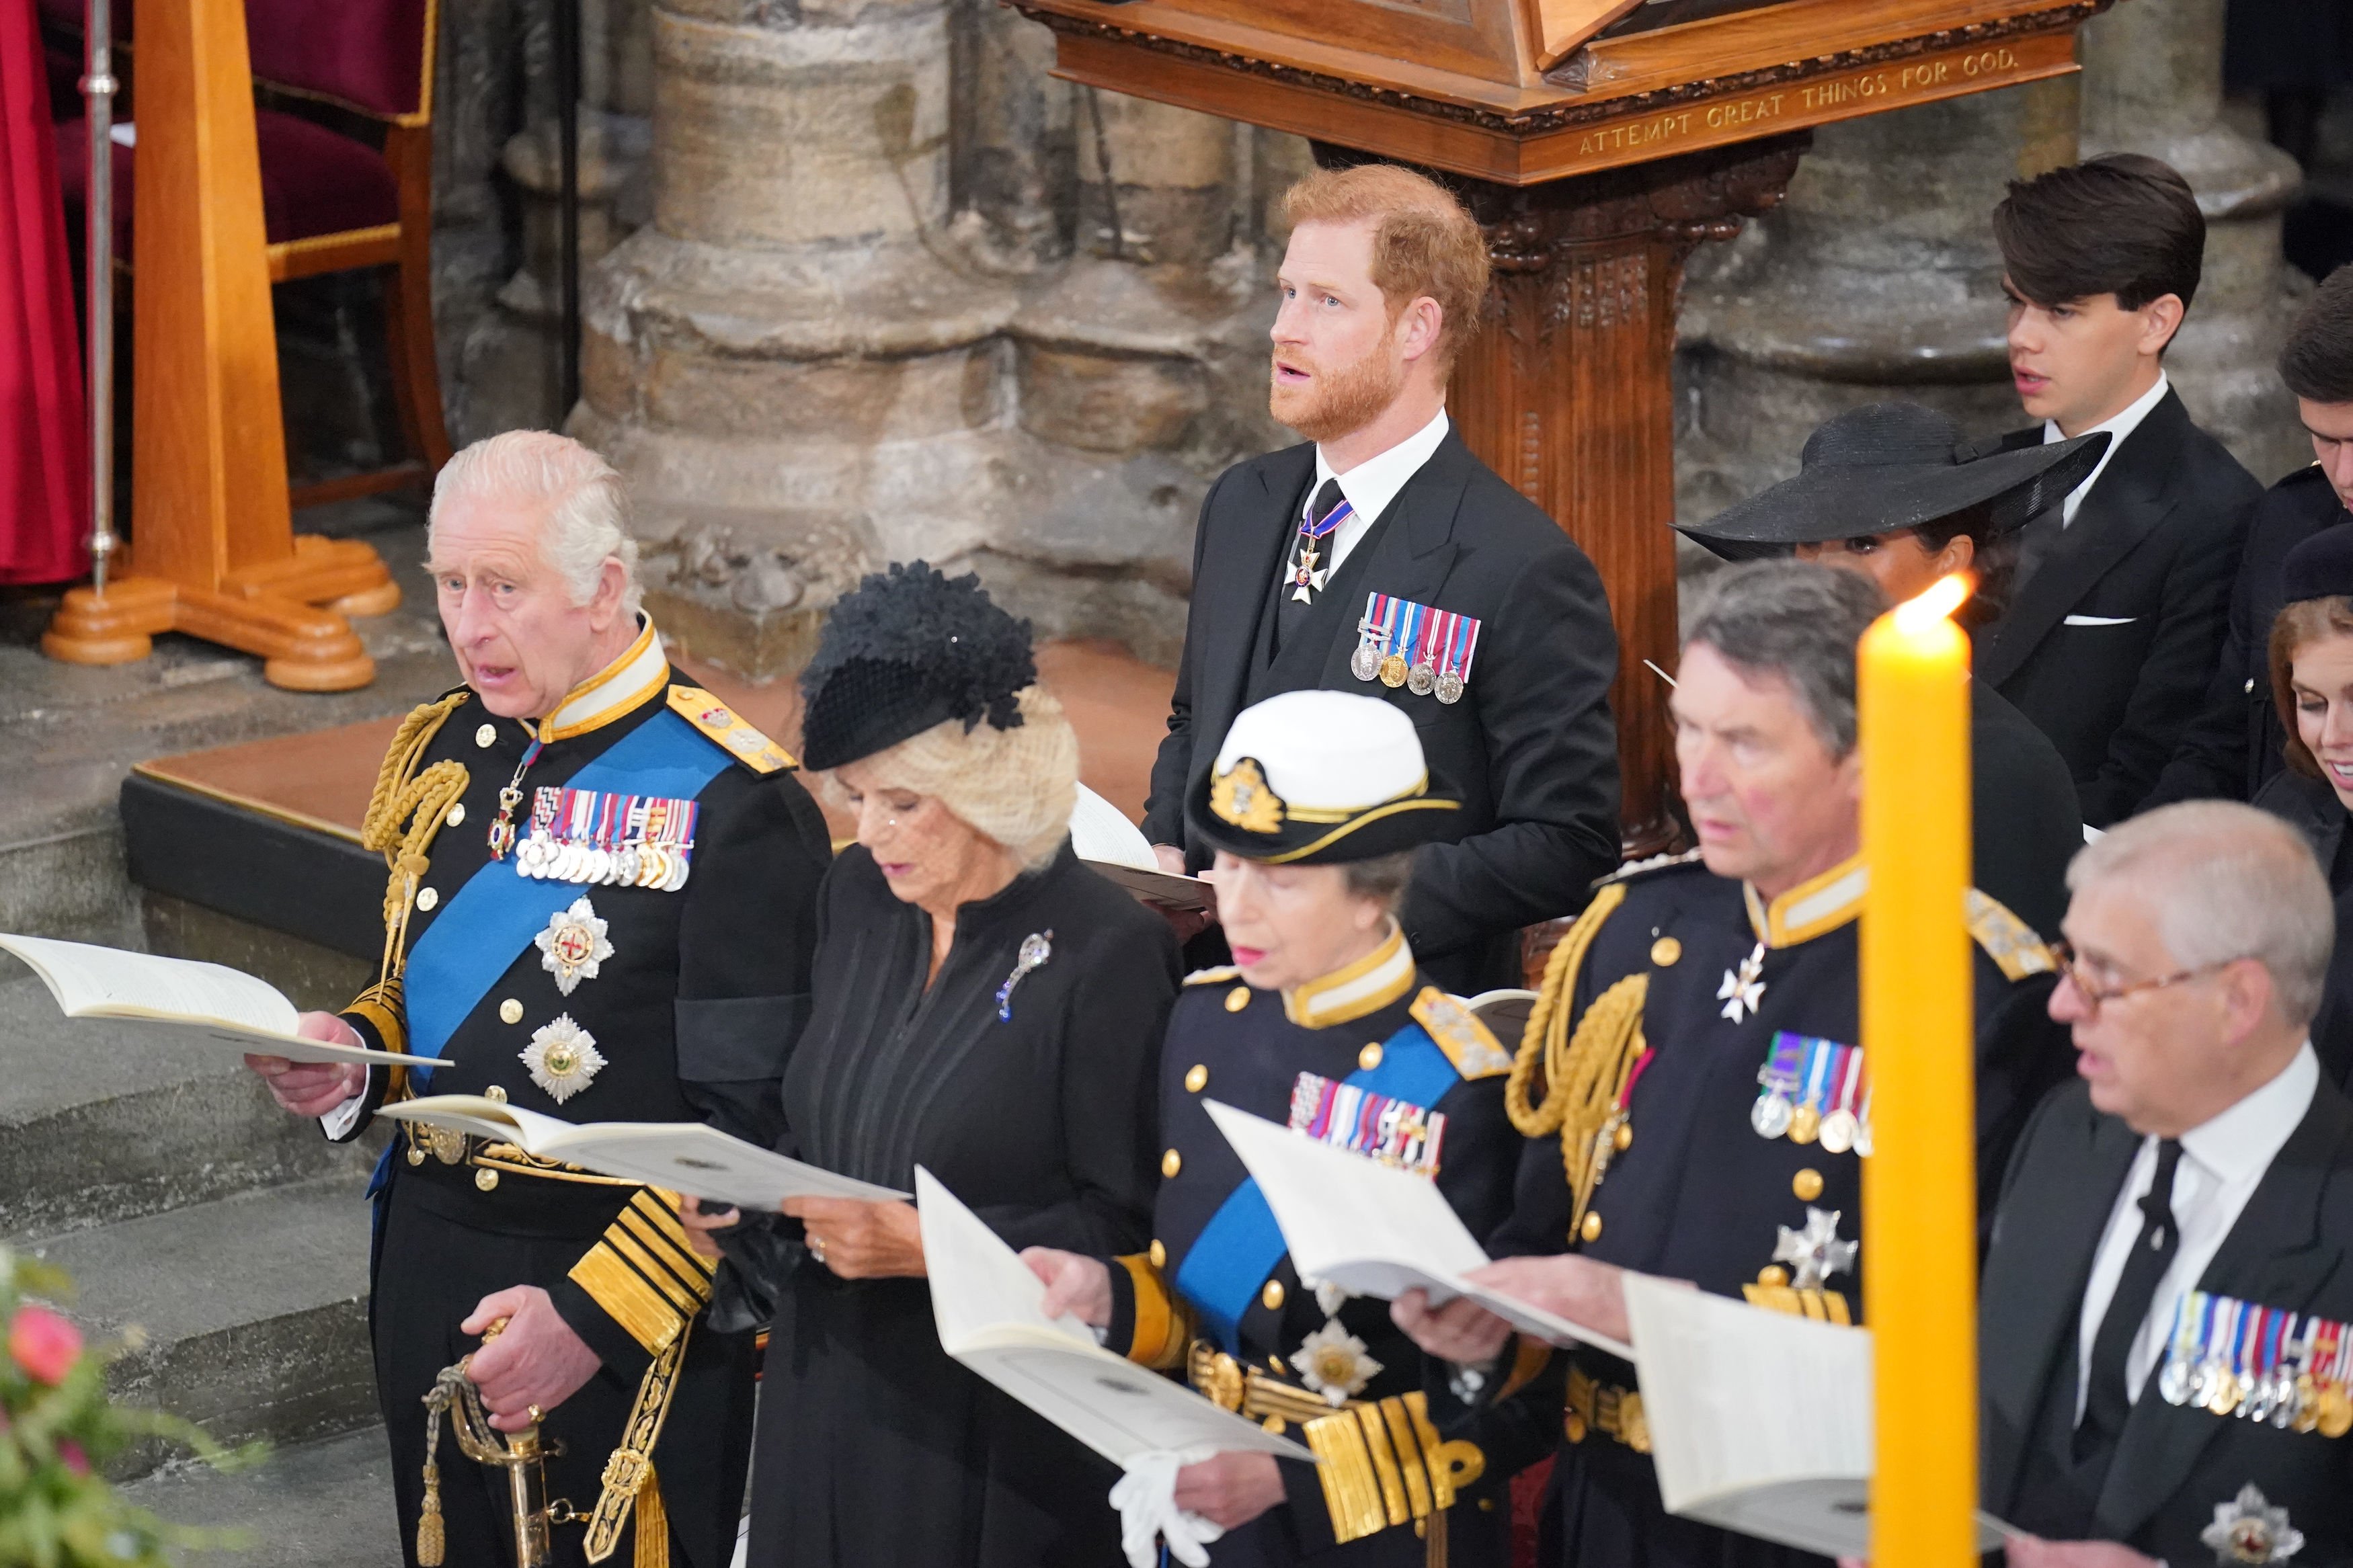 King Charles III, Camilla, Queen Consort, Princess Anne, Princess Royal, Prince Harry, Duke of Sussex, and Meghan, Duchess of Sussex, during the State Funeral of Queen Elizabeth II at Westminster Abbey on September 19, 2022, in London, England. | Source: Getty Images